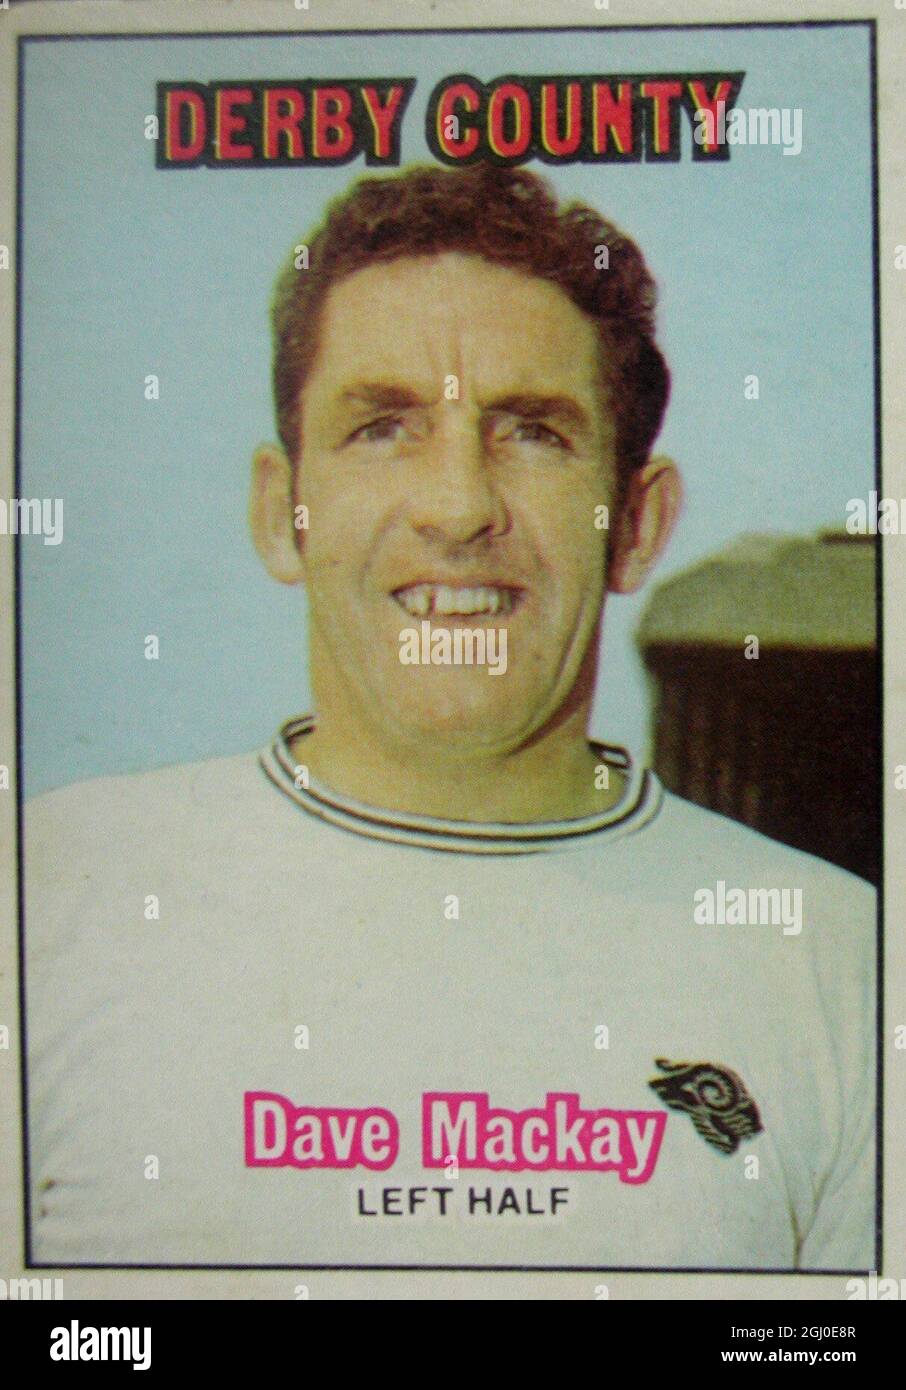 Dave Mackay - Derby County The driving force behind Derby County over the past two seasons, Mackay was a member of the fabulous Tottenham ''double'' side, and after recovering from a twice-broken leg, led Spurs to another FA Cup triumph in 1967. Voted joint Footballer of the Year for 1969-70 with Tony Book, he is one of the most respected players in the Football League. Stock Photo